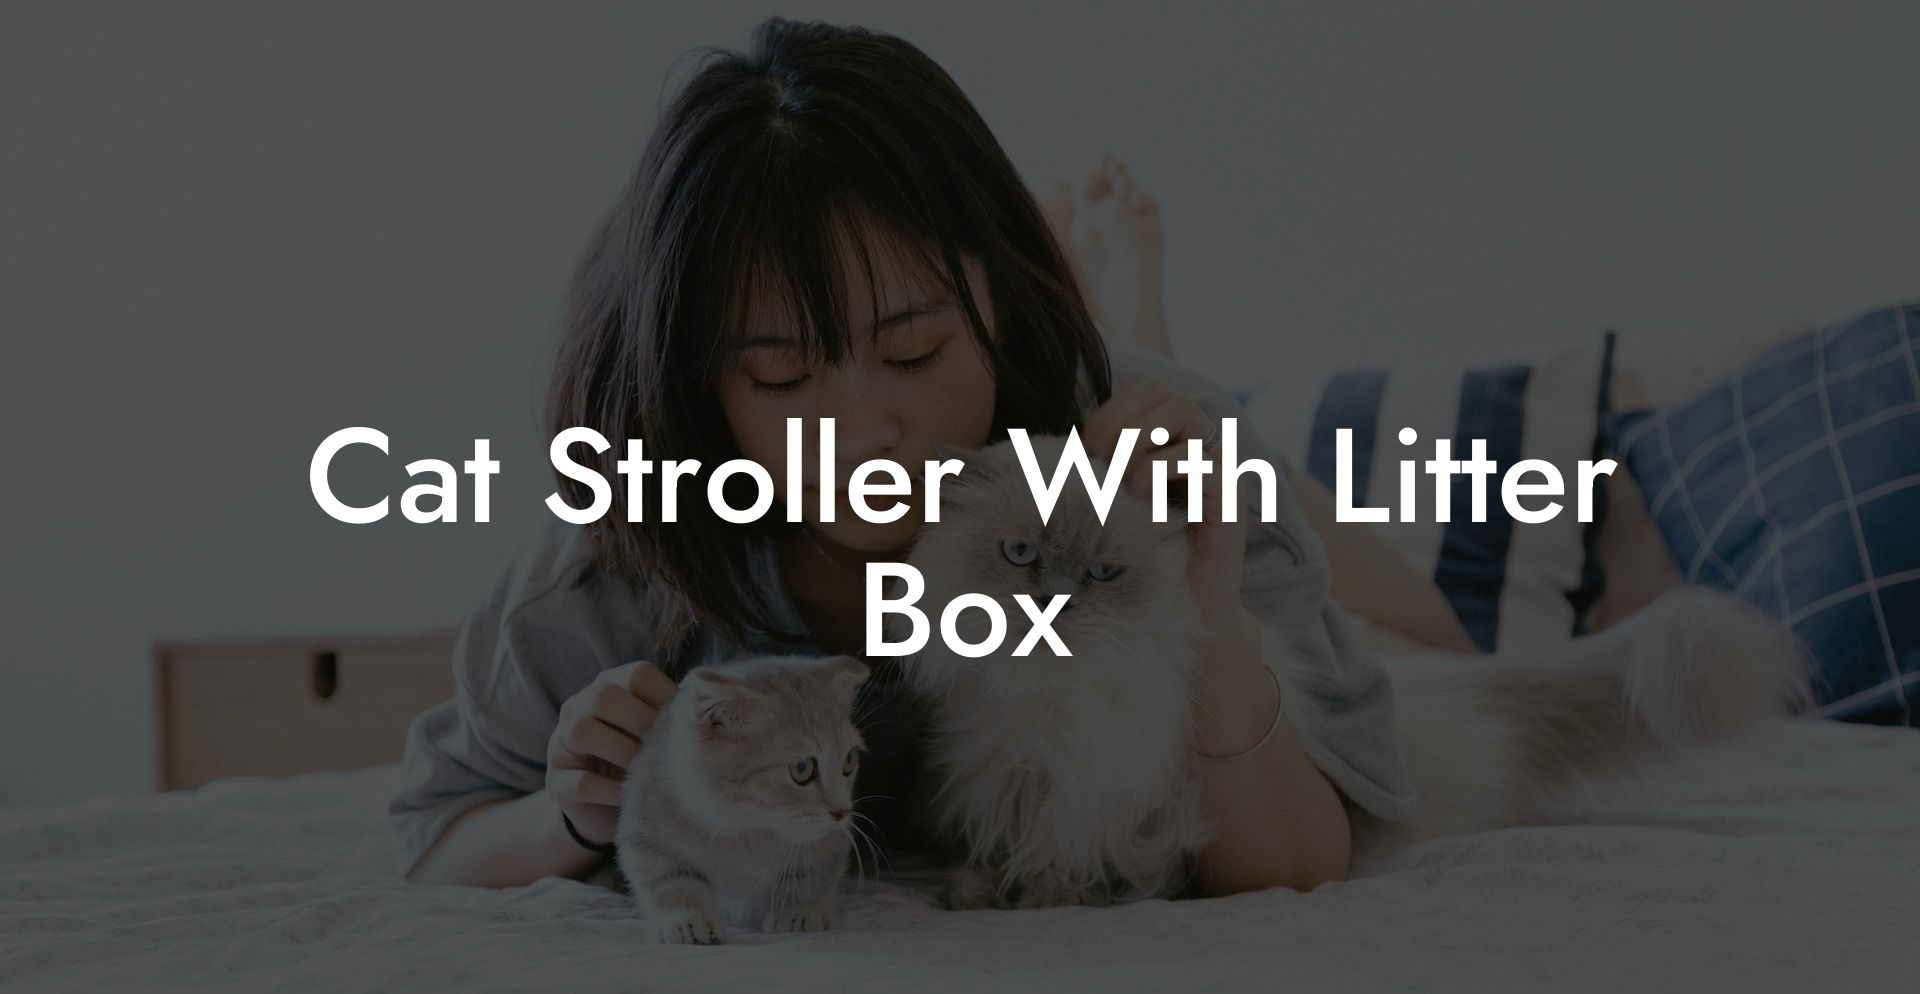 Cat Stroller With Litter Box